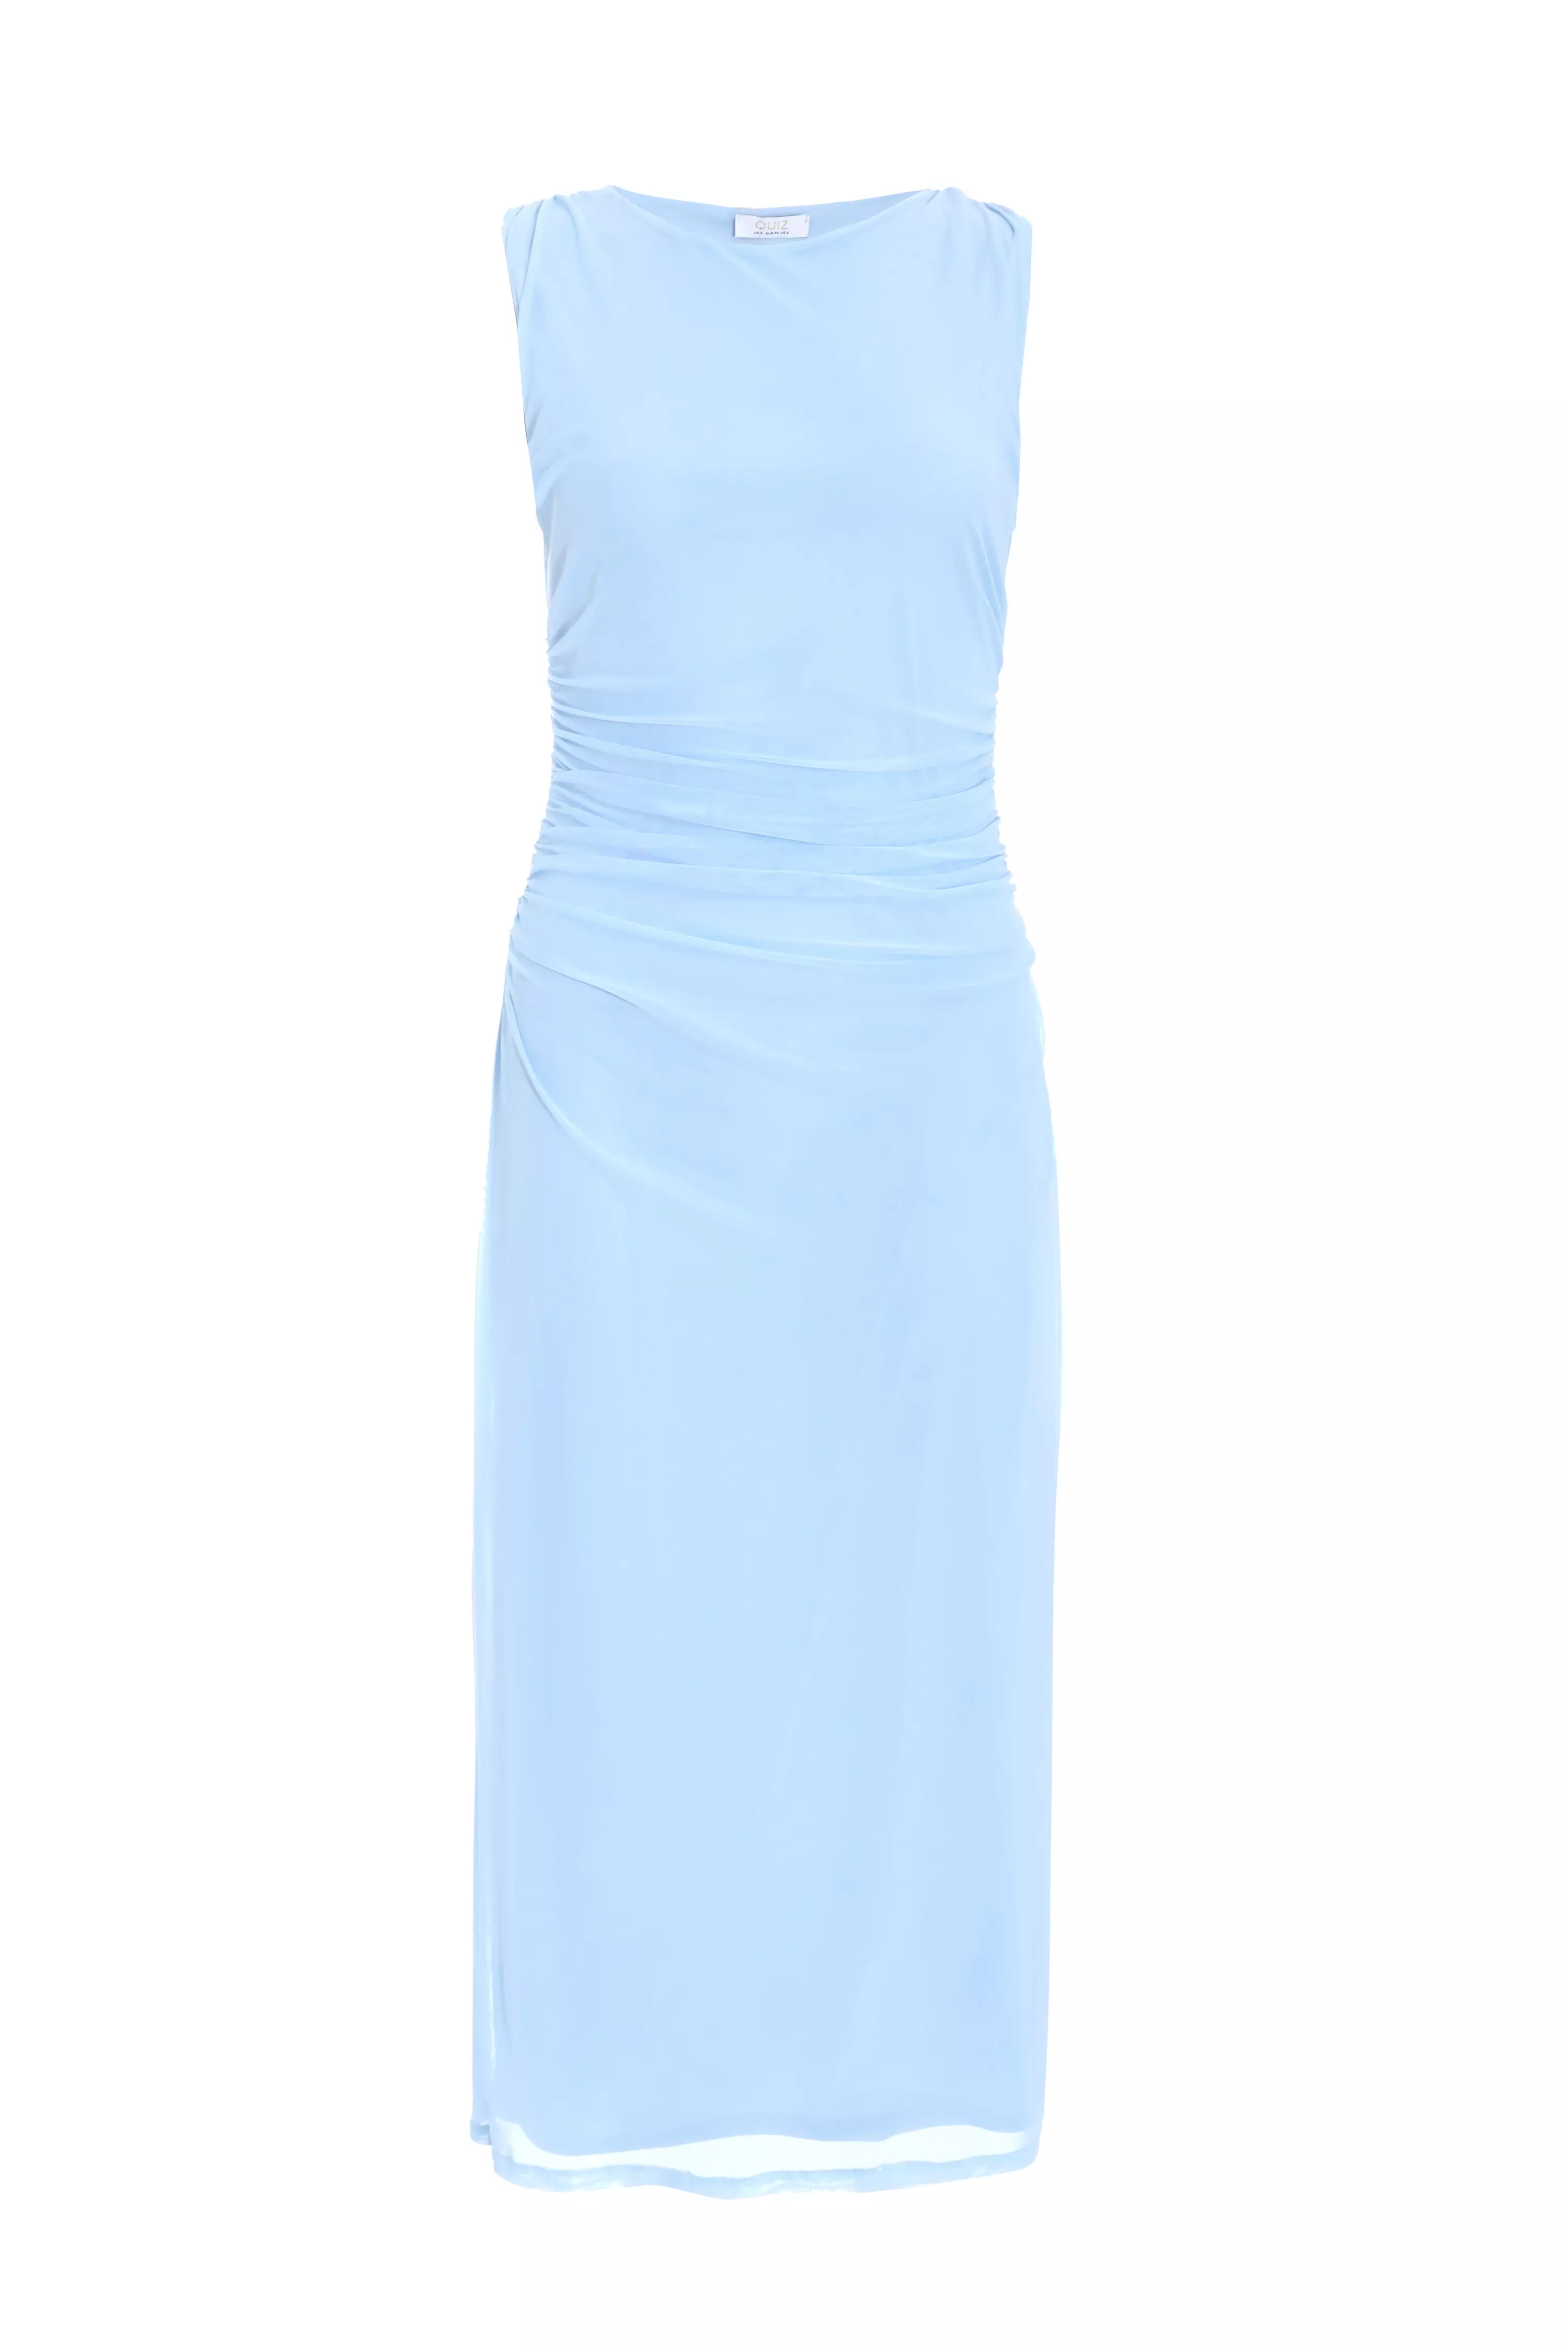 Blue Mesh Ruched Bodycon Midaxi Dress